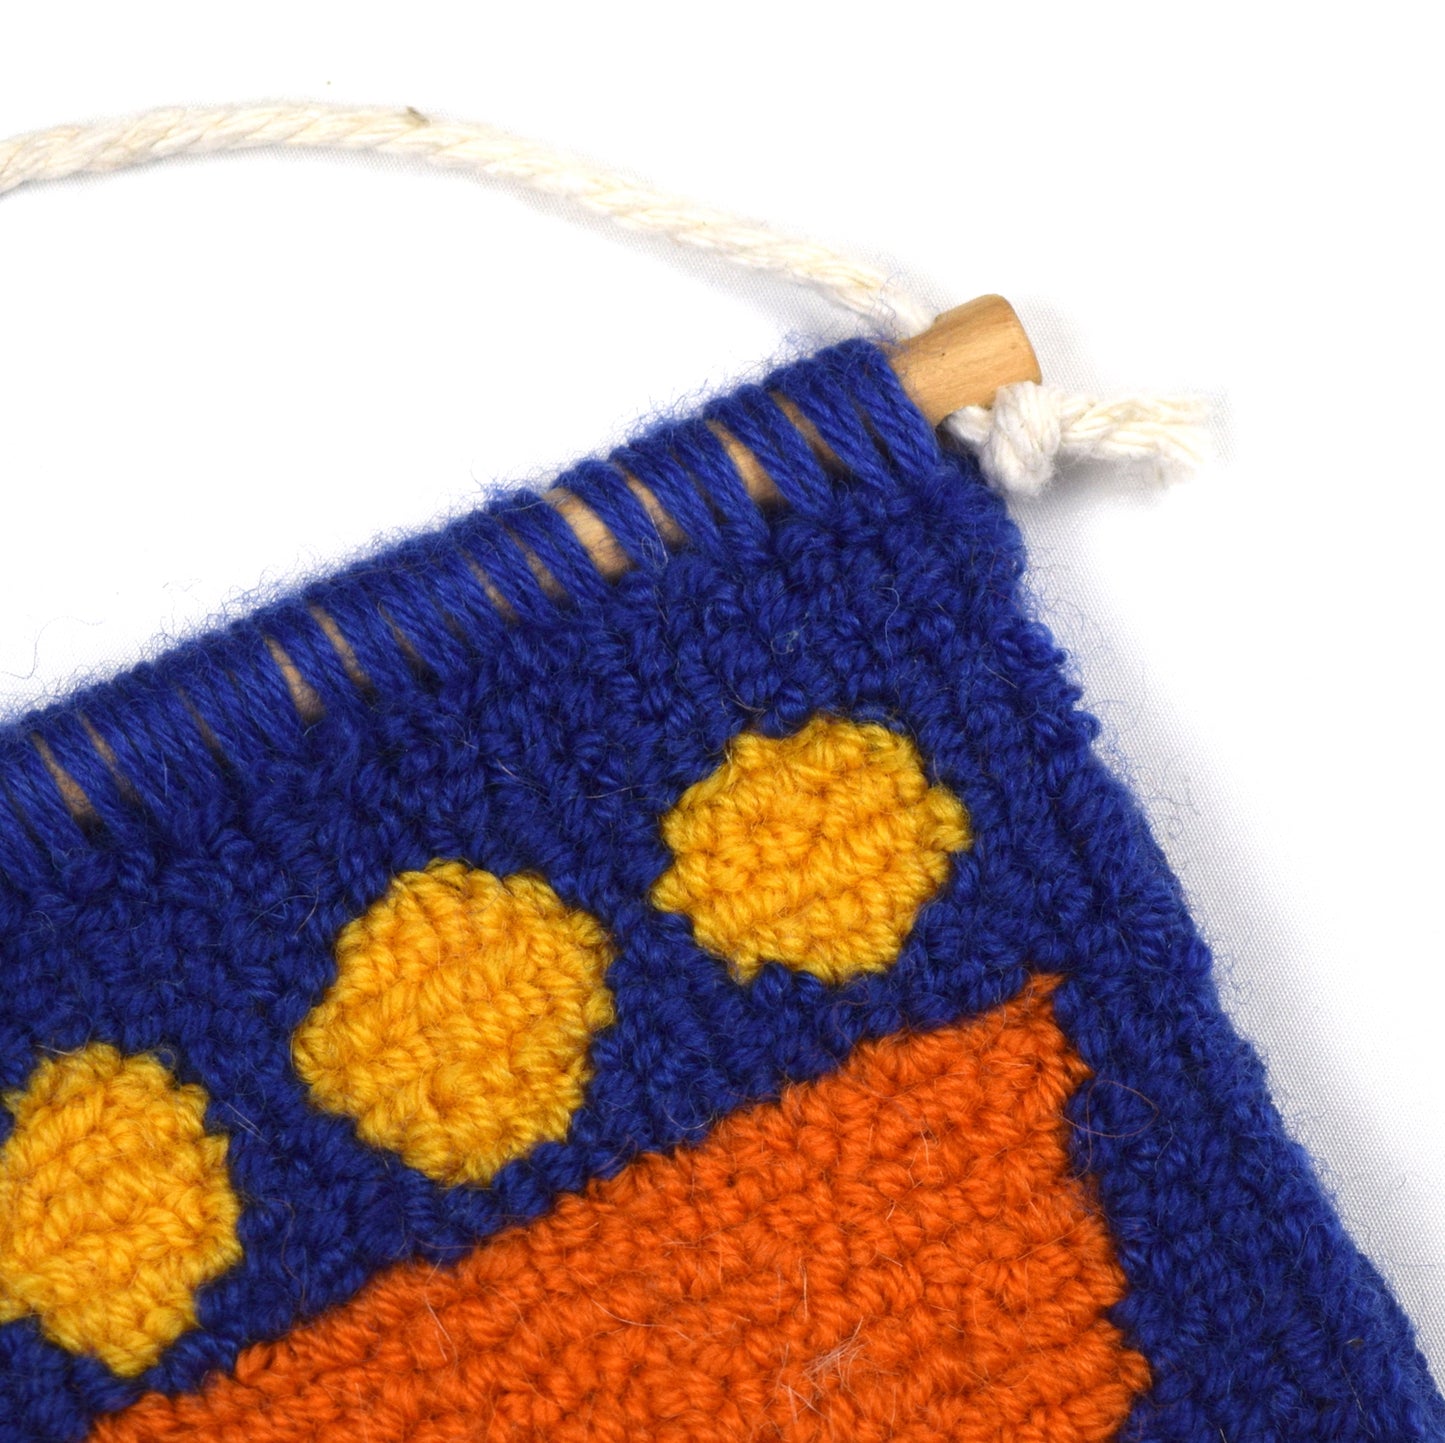 A contemporary hand punched miniature made using British Wool in royal blue, an orange semi-circle and yellow circles close up.